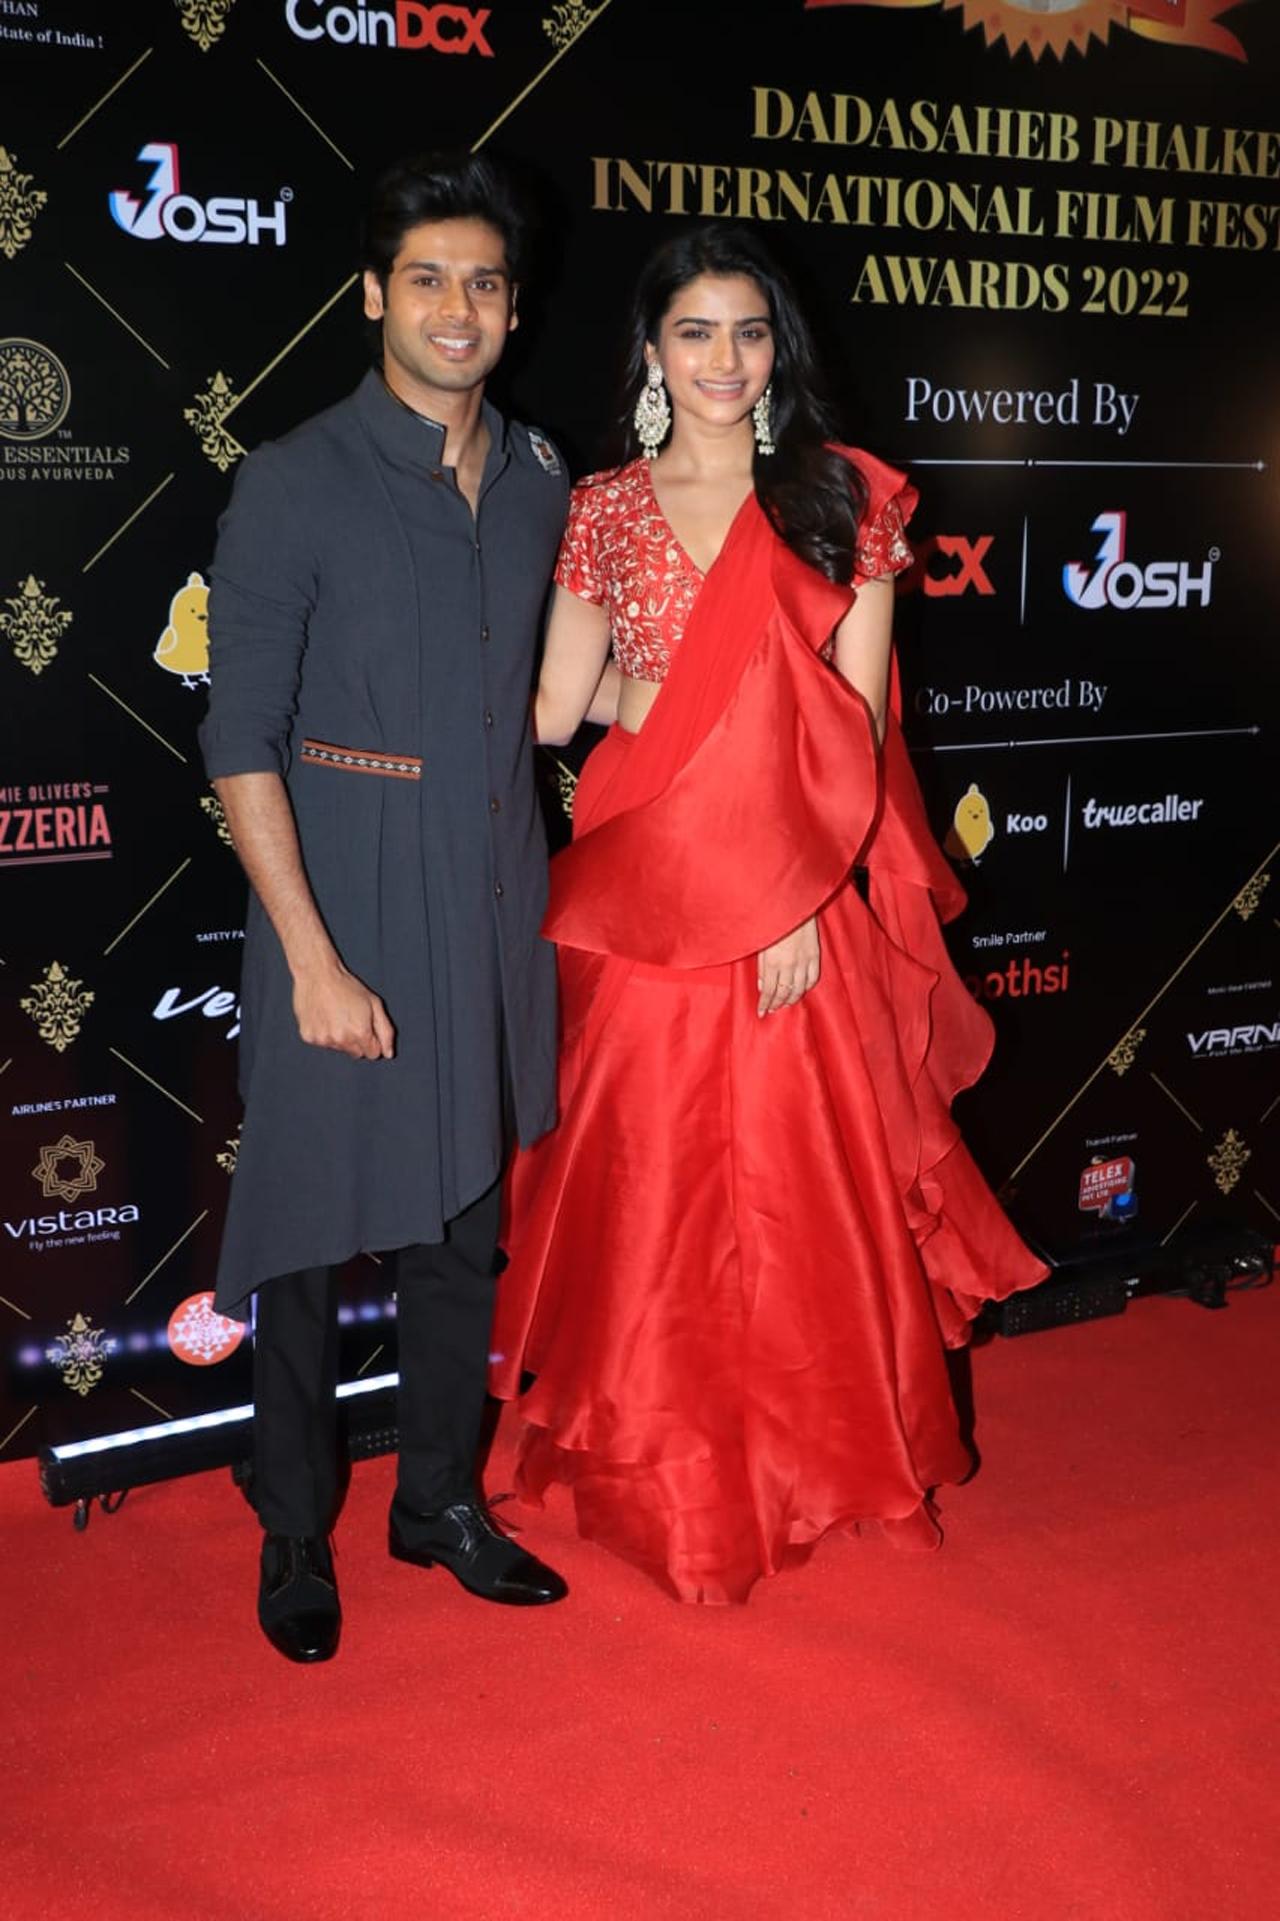 Abhimanyu Dassani and his sister Avantika Dassani were all smiles as they walked the red carpet together.